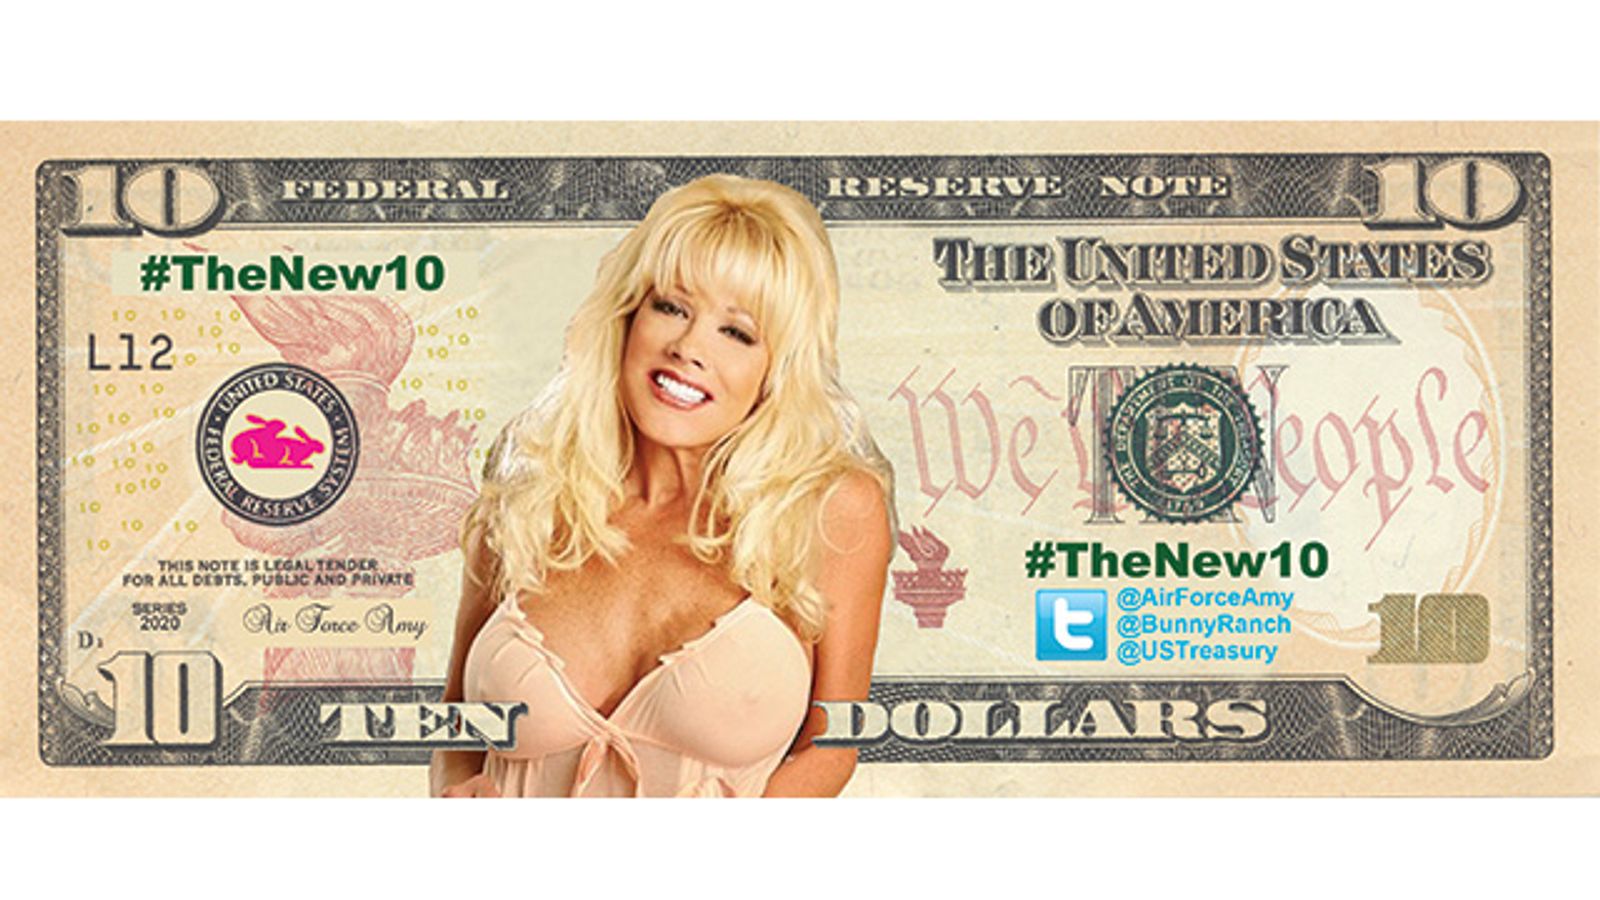 Bunny Ranch Hooker Asks To Be 1st Woman On New $10 Bill